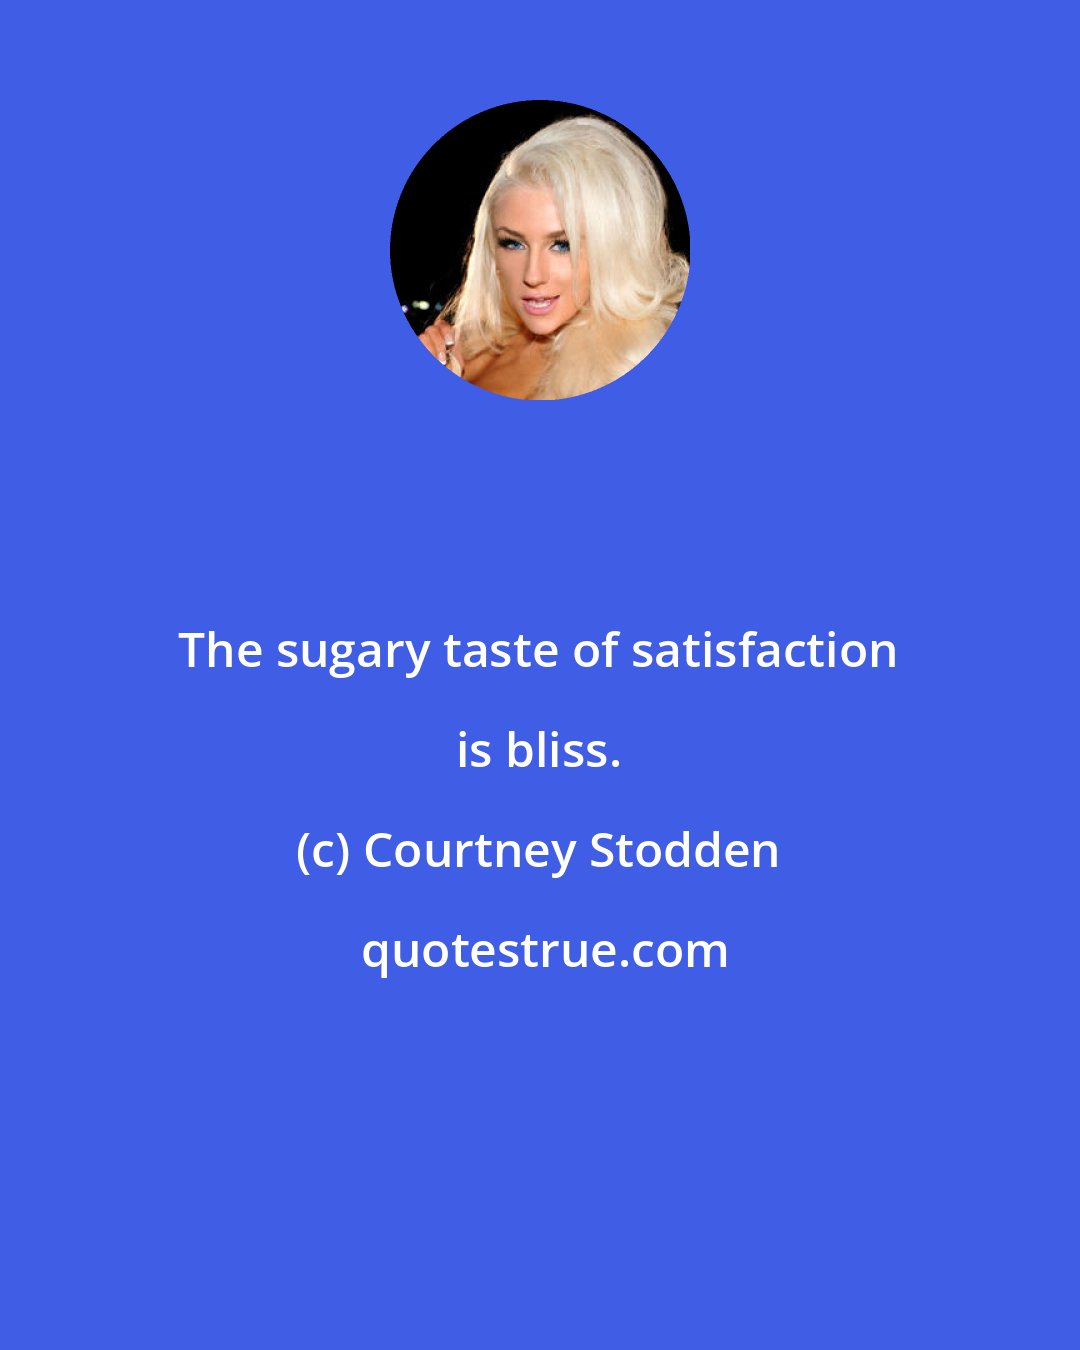 Courtney Stodden: The sugary taste of satisfaction is bliss.